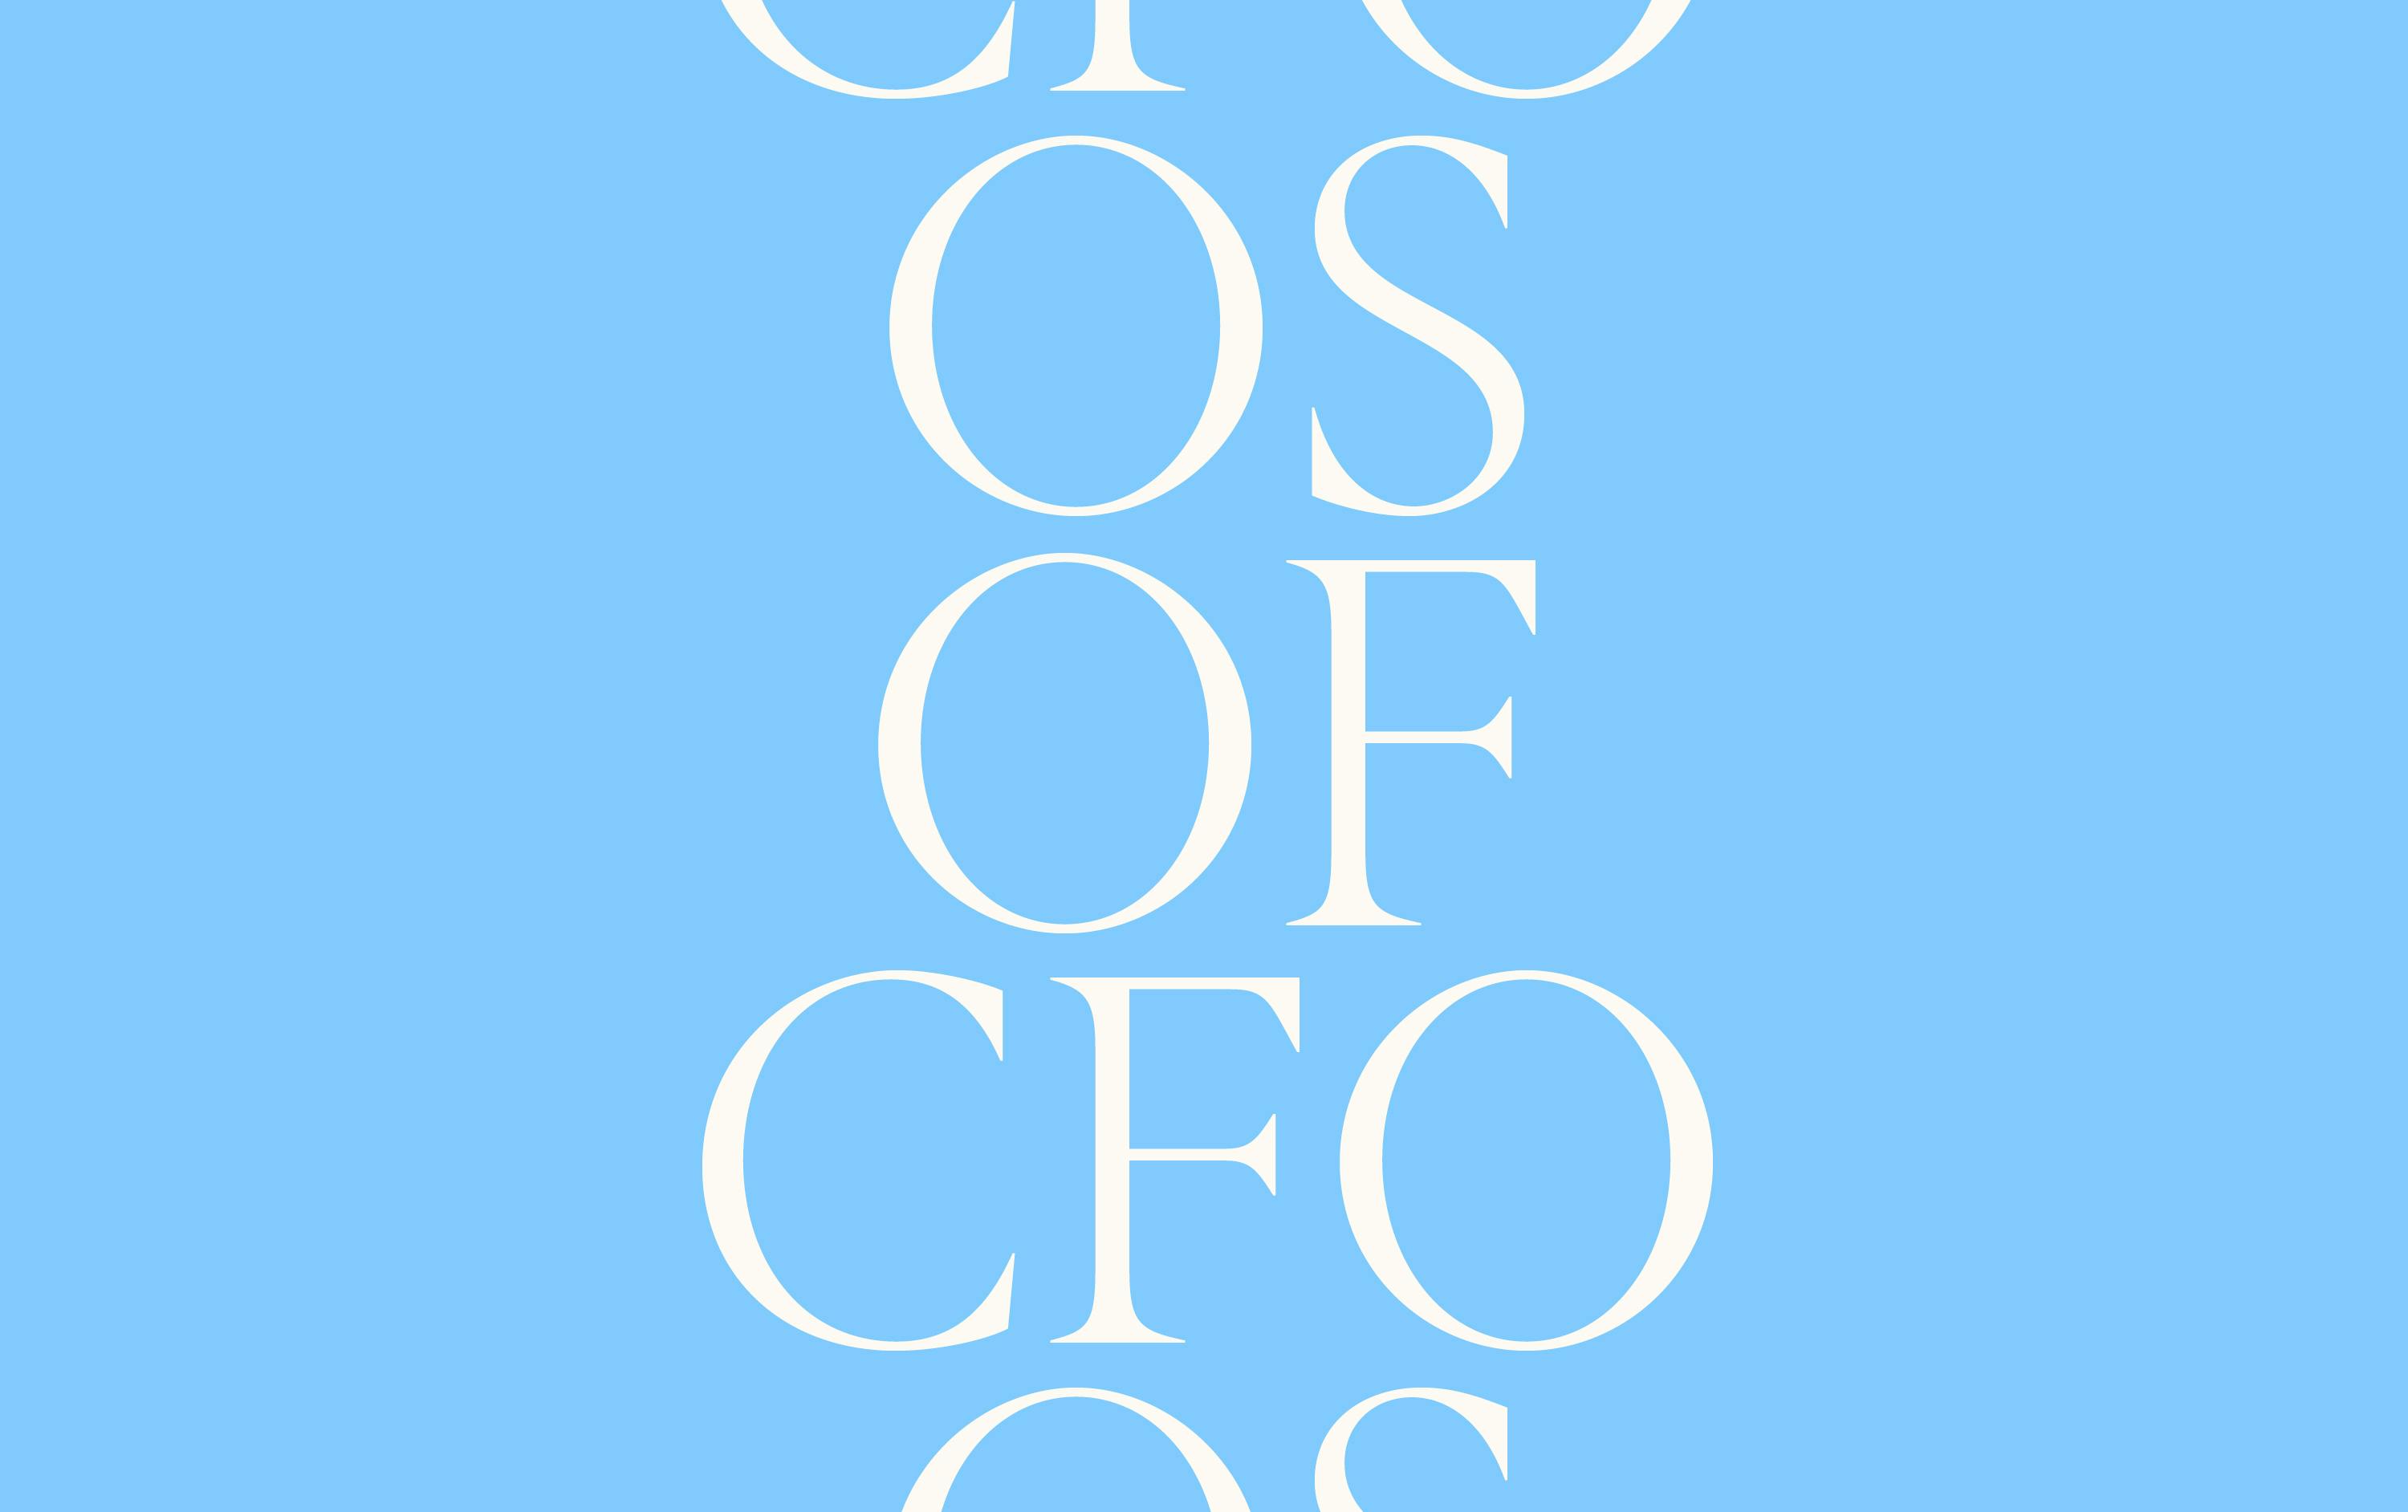 The operating system of the CFO